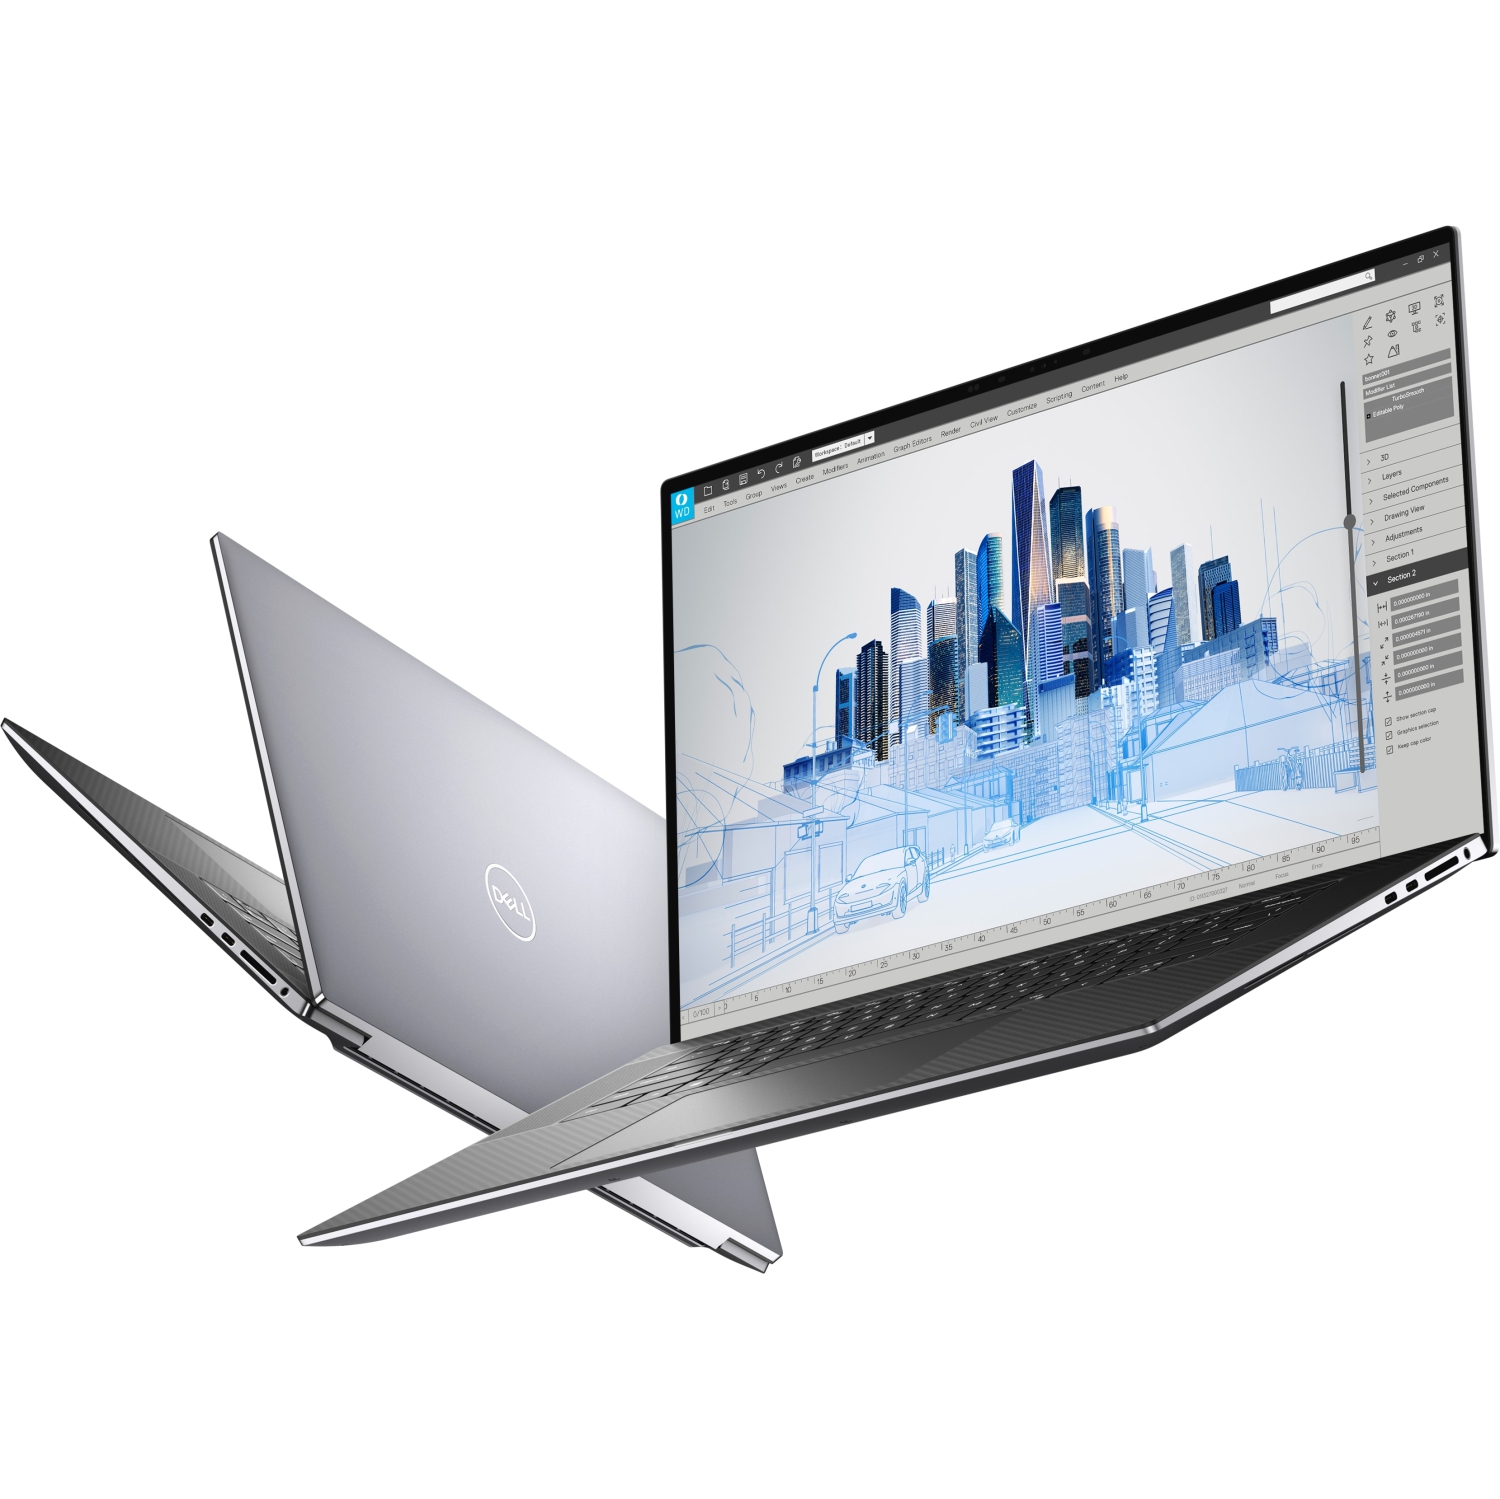 Refurbished (Excellent) - Dell Precision 5000 5760 Workstation Laptop (2021), 17" FHD+, Core i7, 256GB SSD, 8GB RAM, RTX A3000, 4.8 GHz, 11th Gen CPU Certified